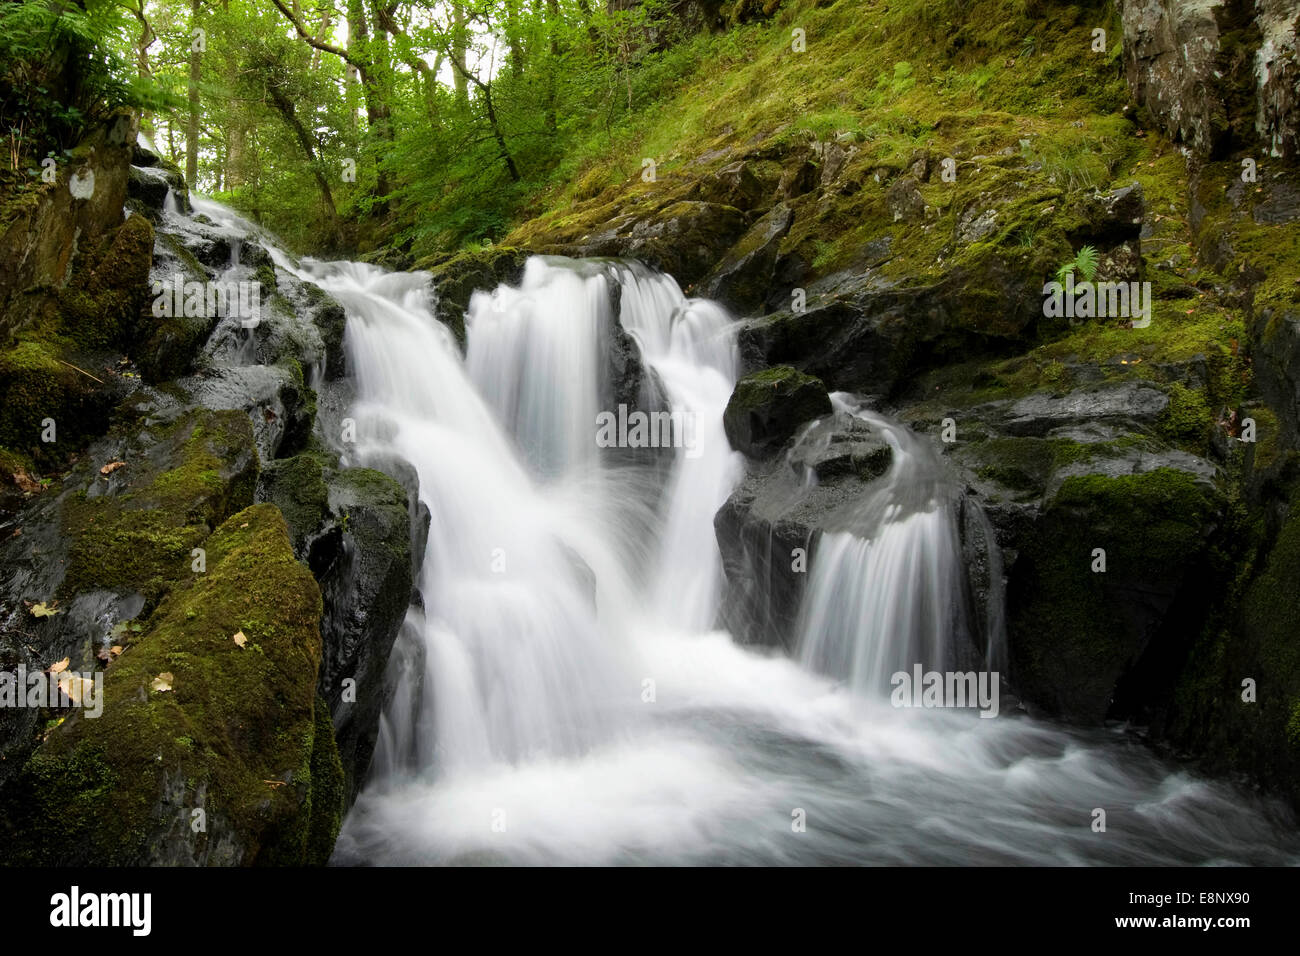 One of the waterfalls on a woodland walk in North Wales. Stock Photo